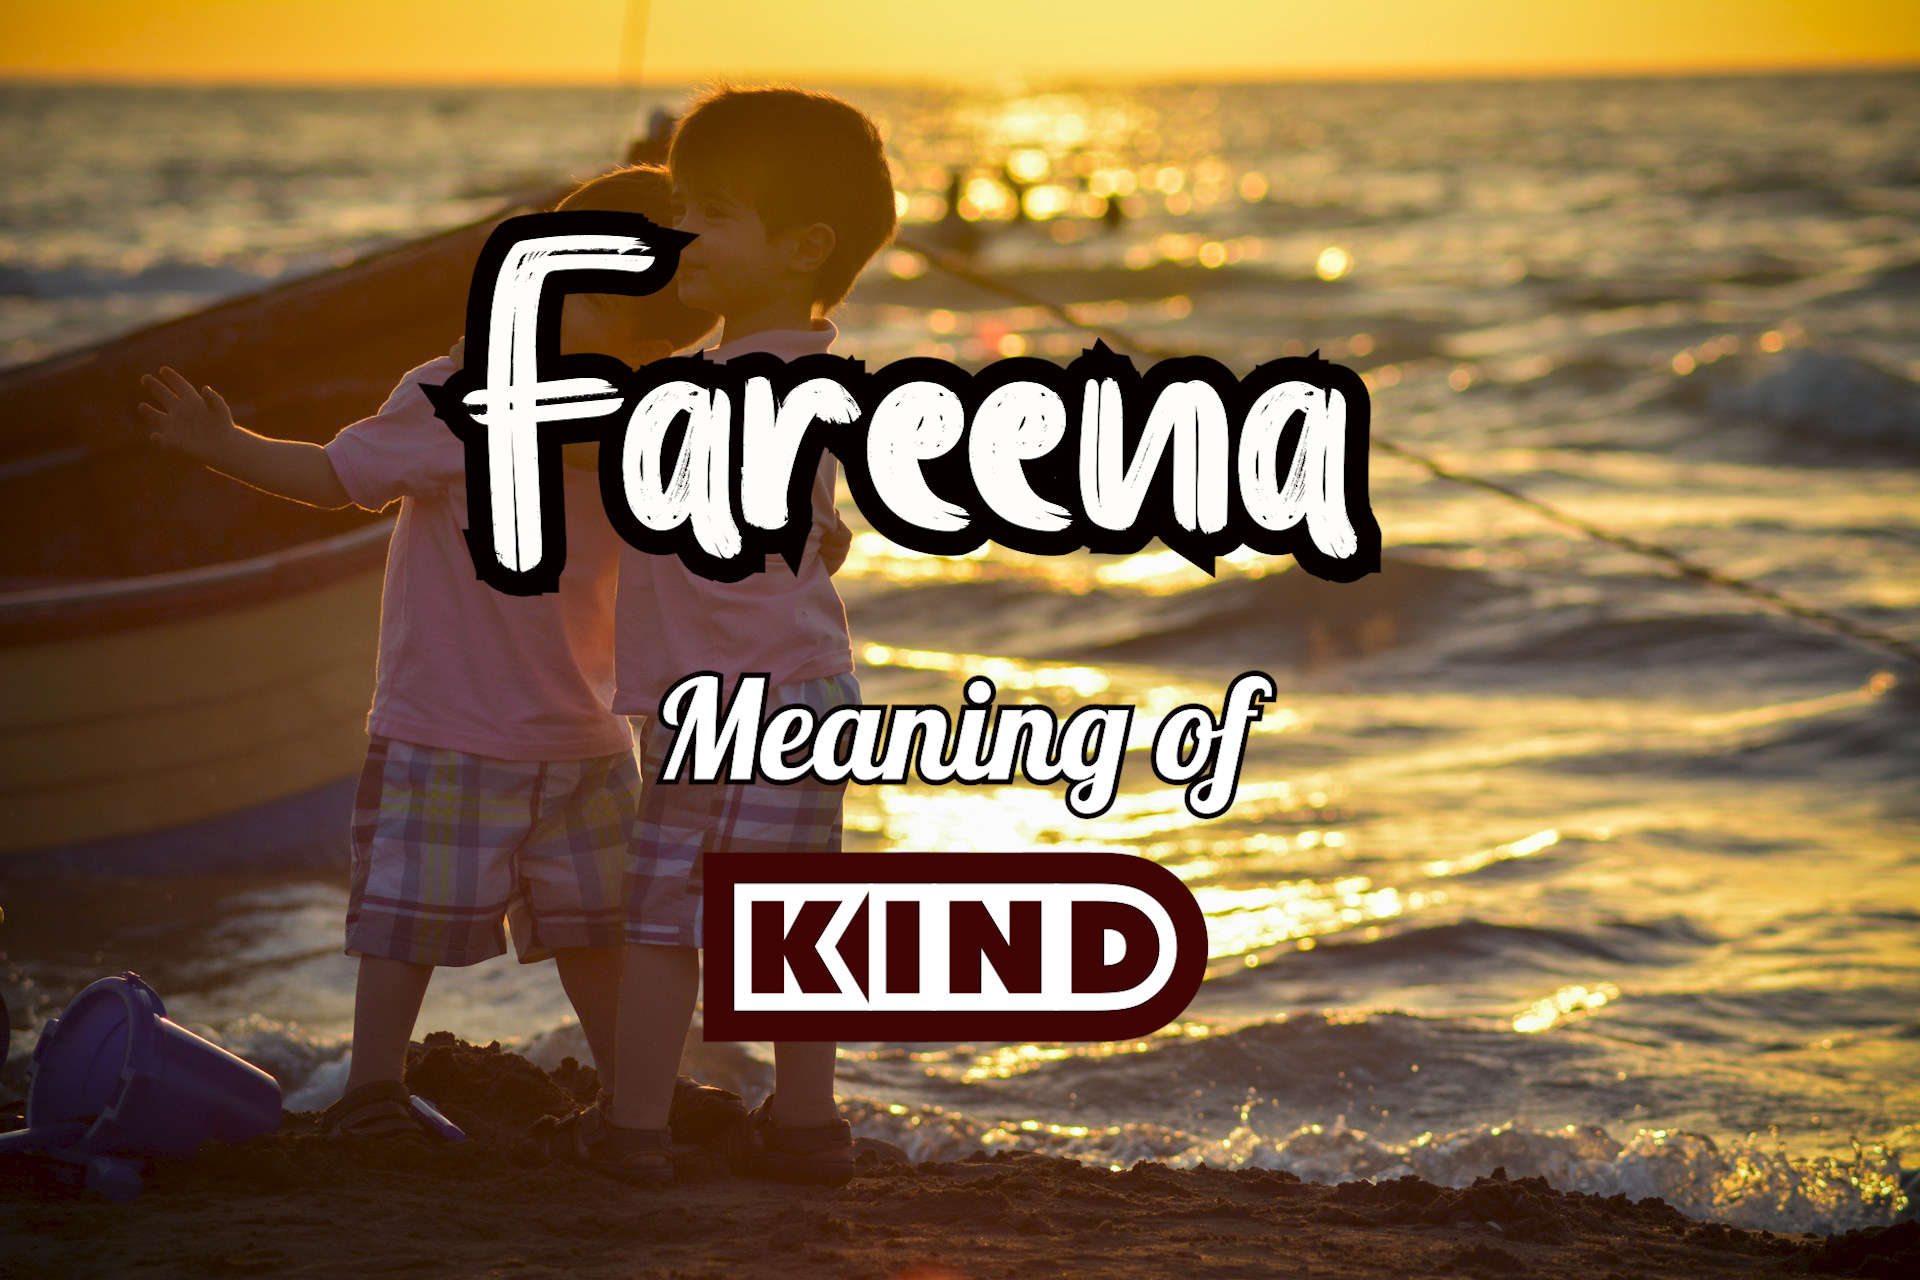 fareena baby name with meaning kind